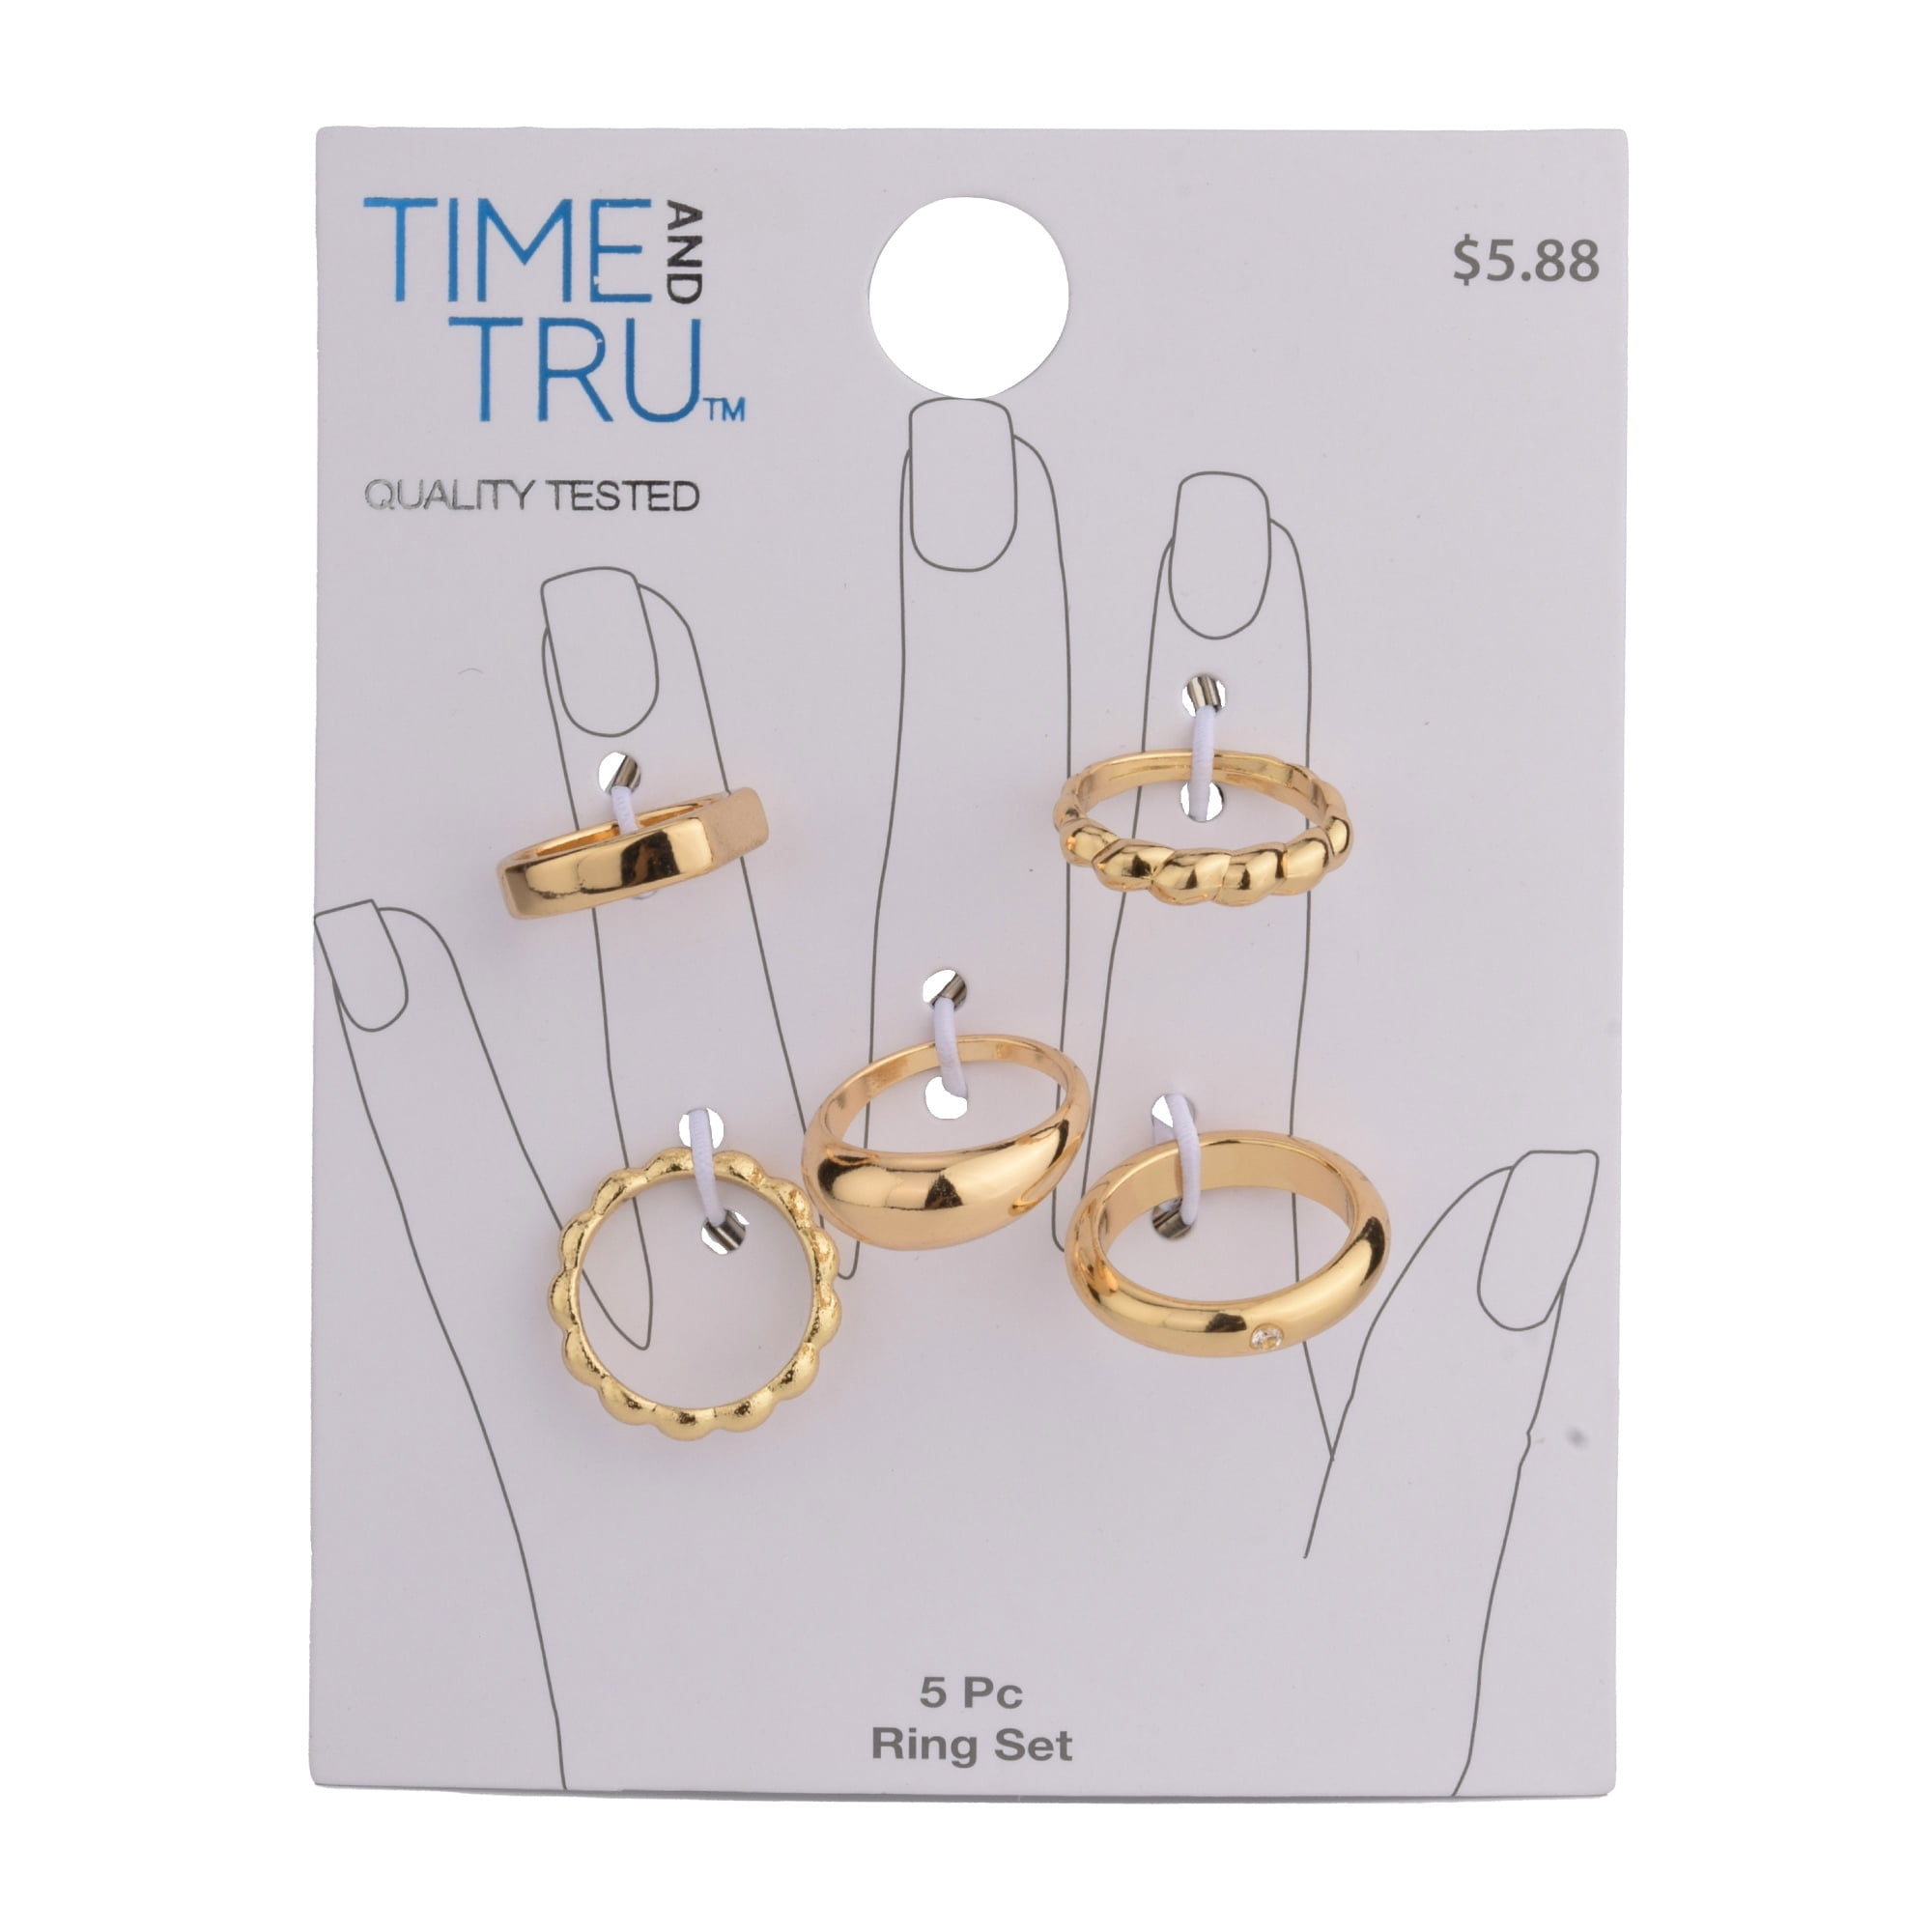 "Time and Tru" Time and Tru Female 5pc Gold Plated Ring Set